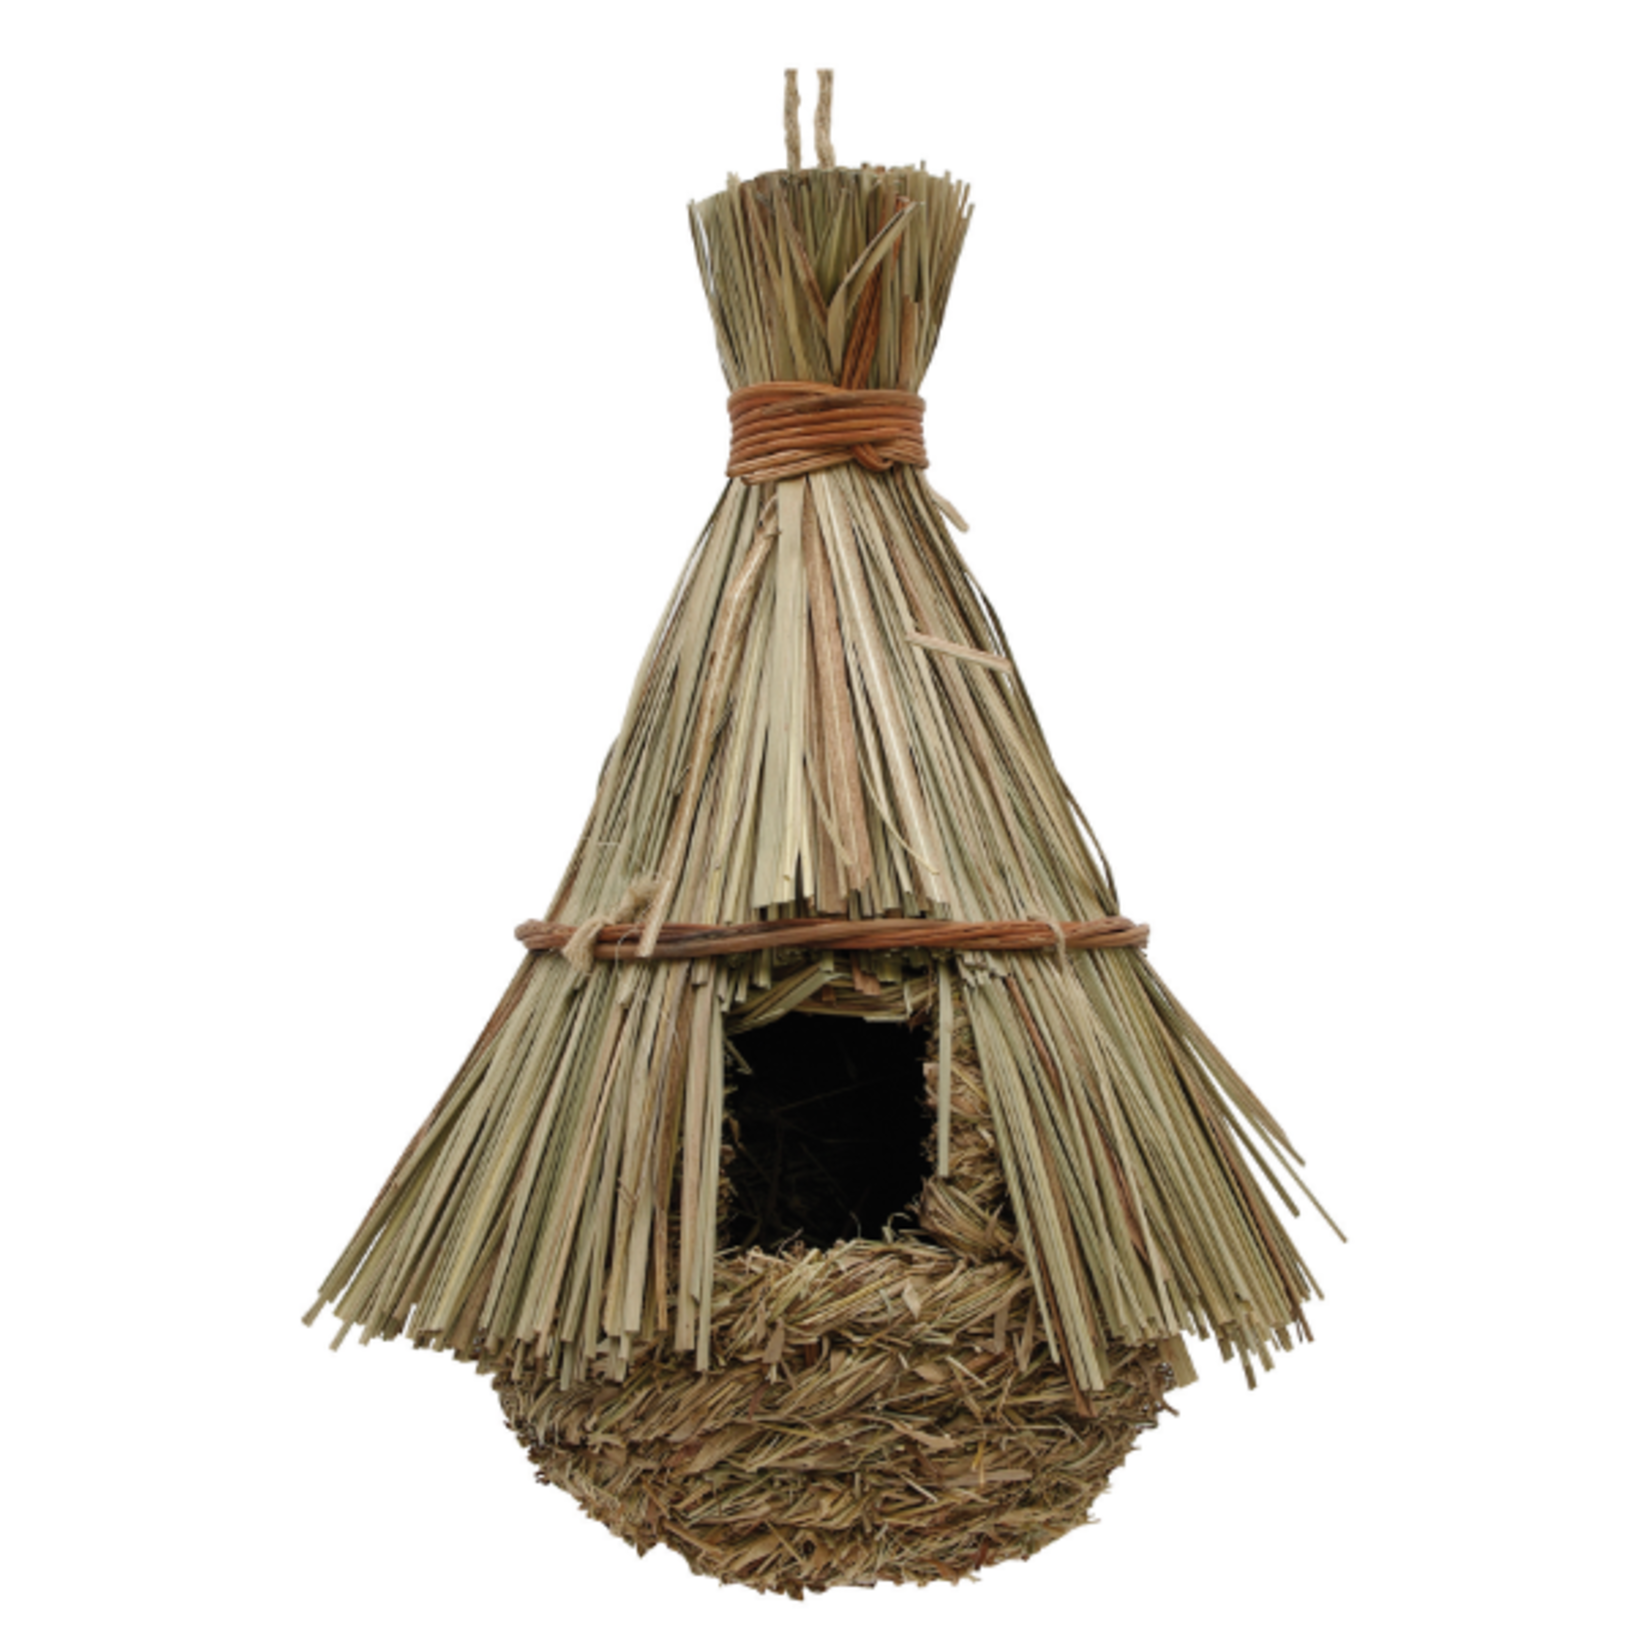 Living World Outdoor Bird Nest - Reed with Orchard Grass - Hut - 8.5 x 8.5 x 12.2 in